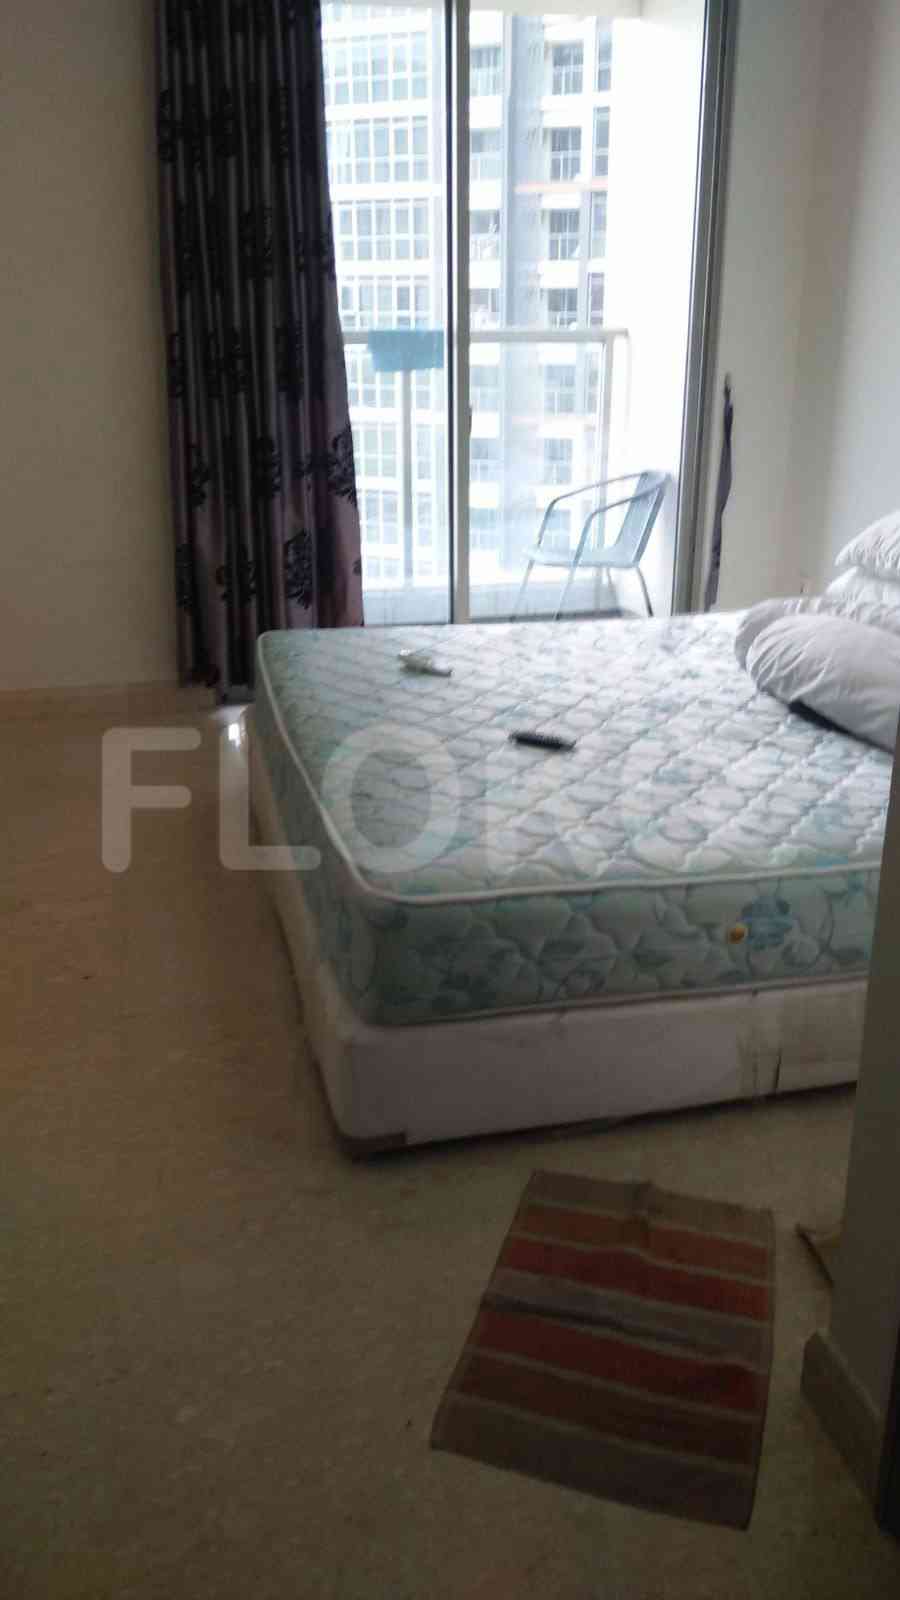 1 Bedroom on 27th Floor for Rent in Gold Coast Apartment - fka5ac 5